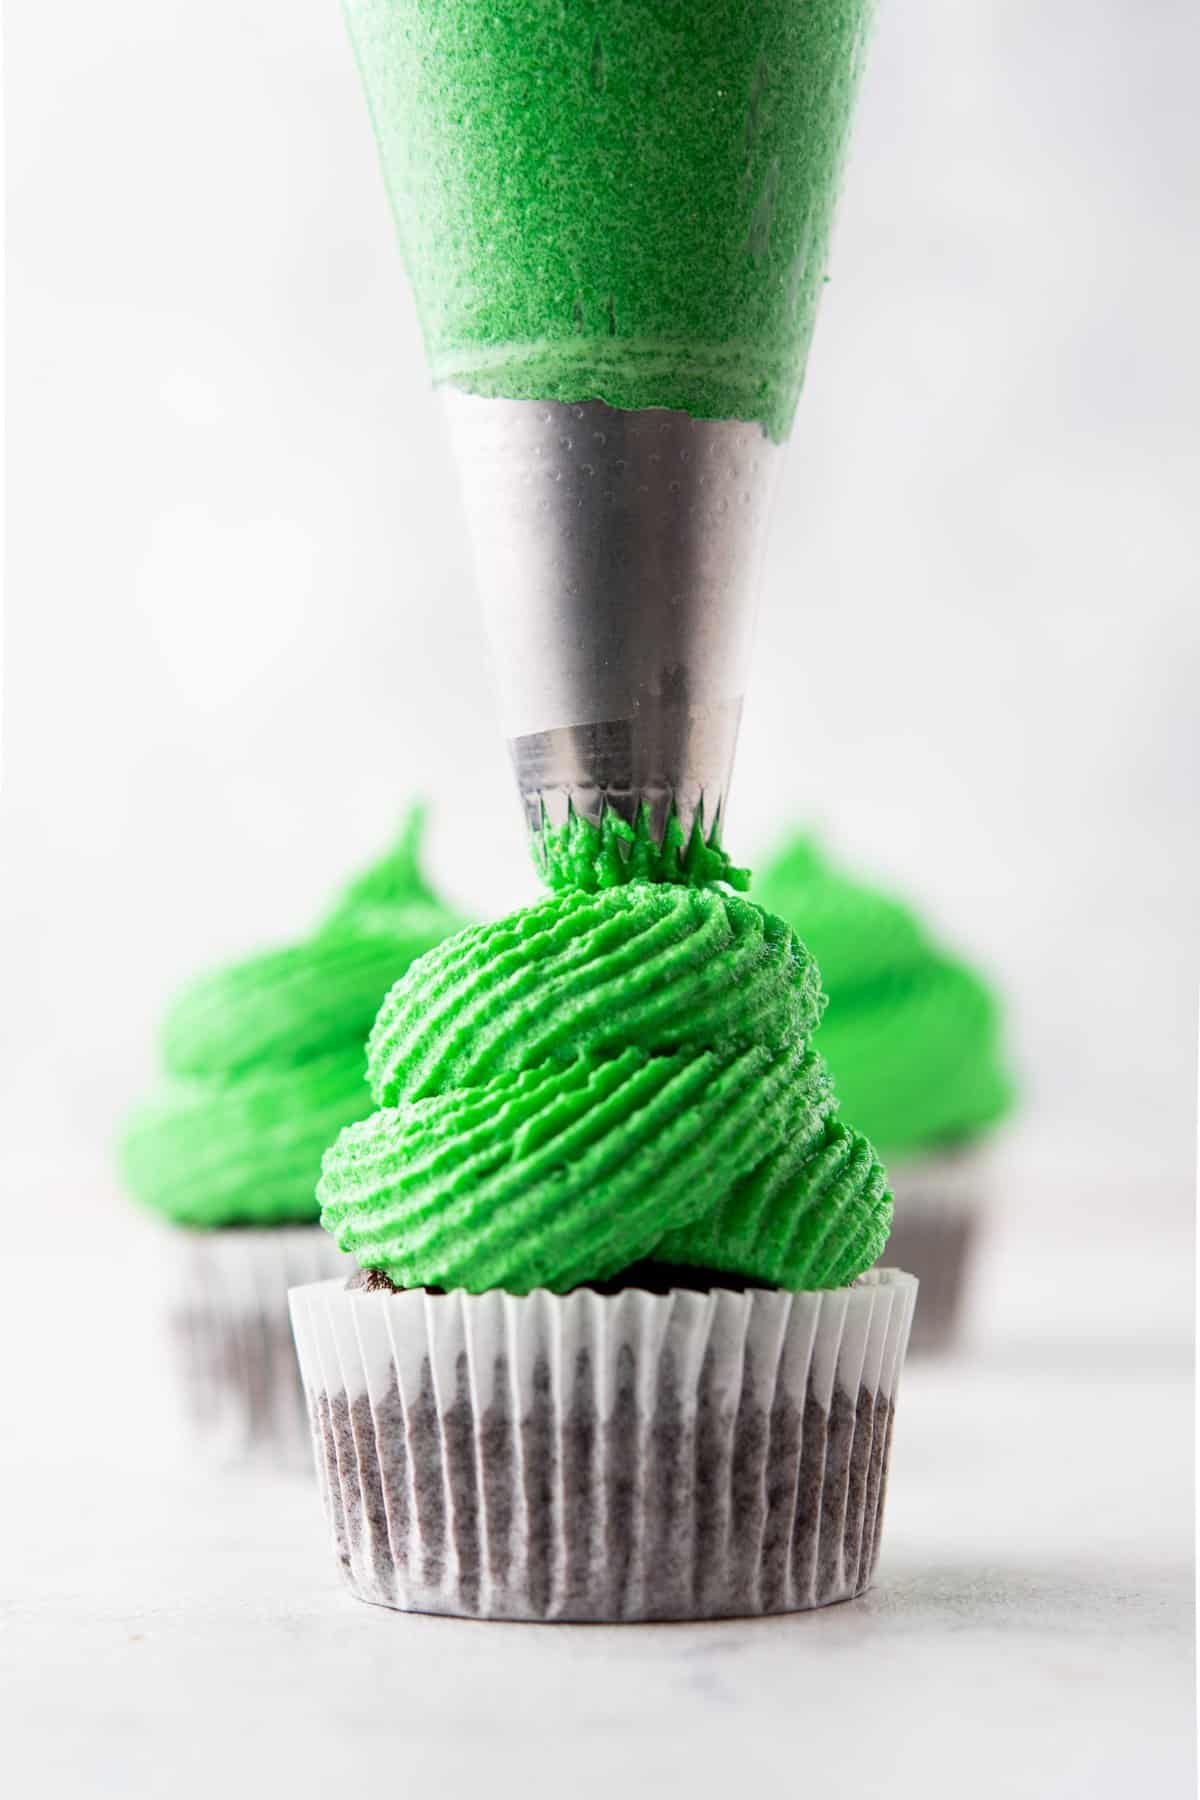 Piping bag frosting the cupcake with green frosting on white surface. 